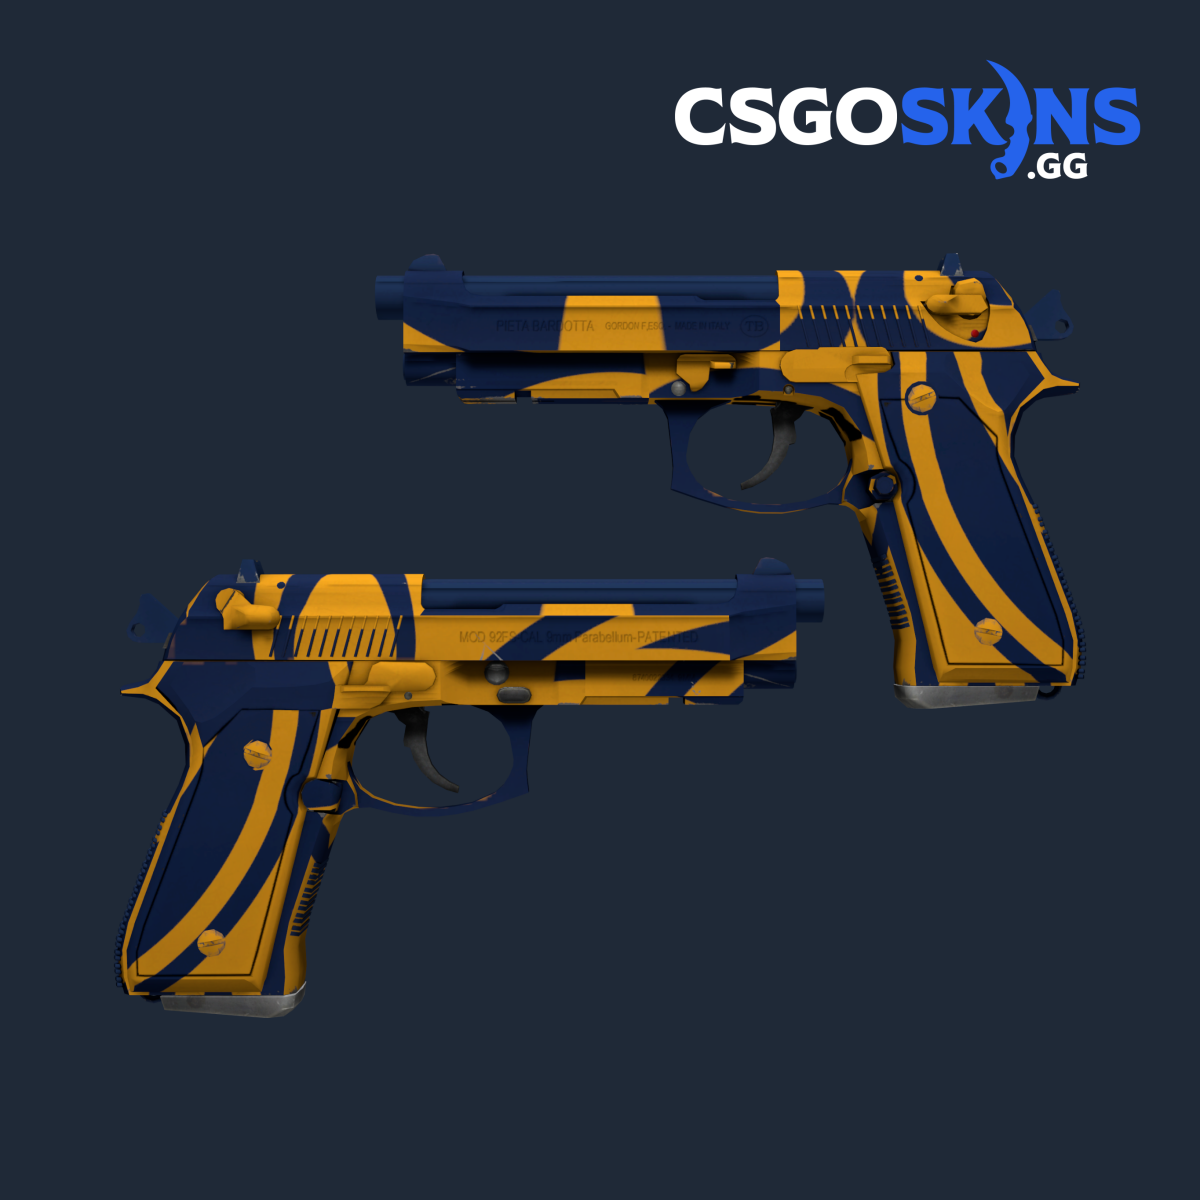 instaling Dual Berettas Stained cs go skin